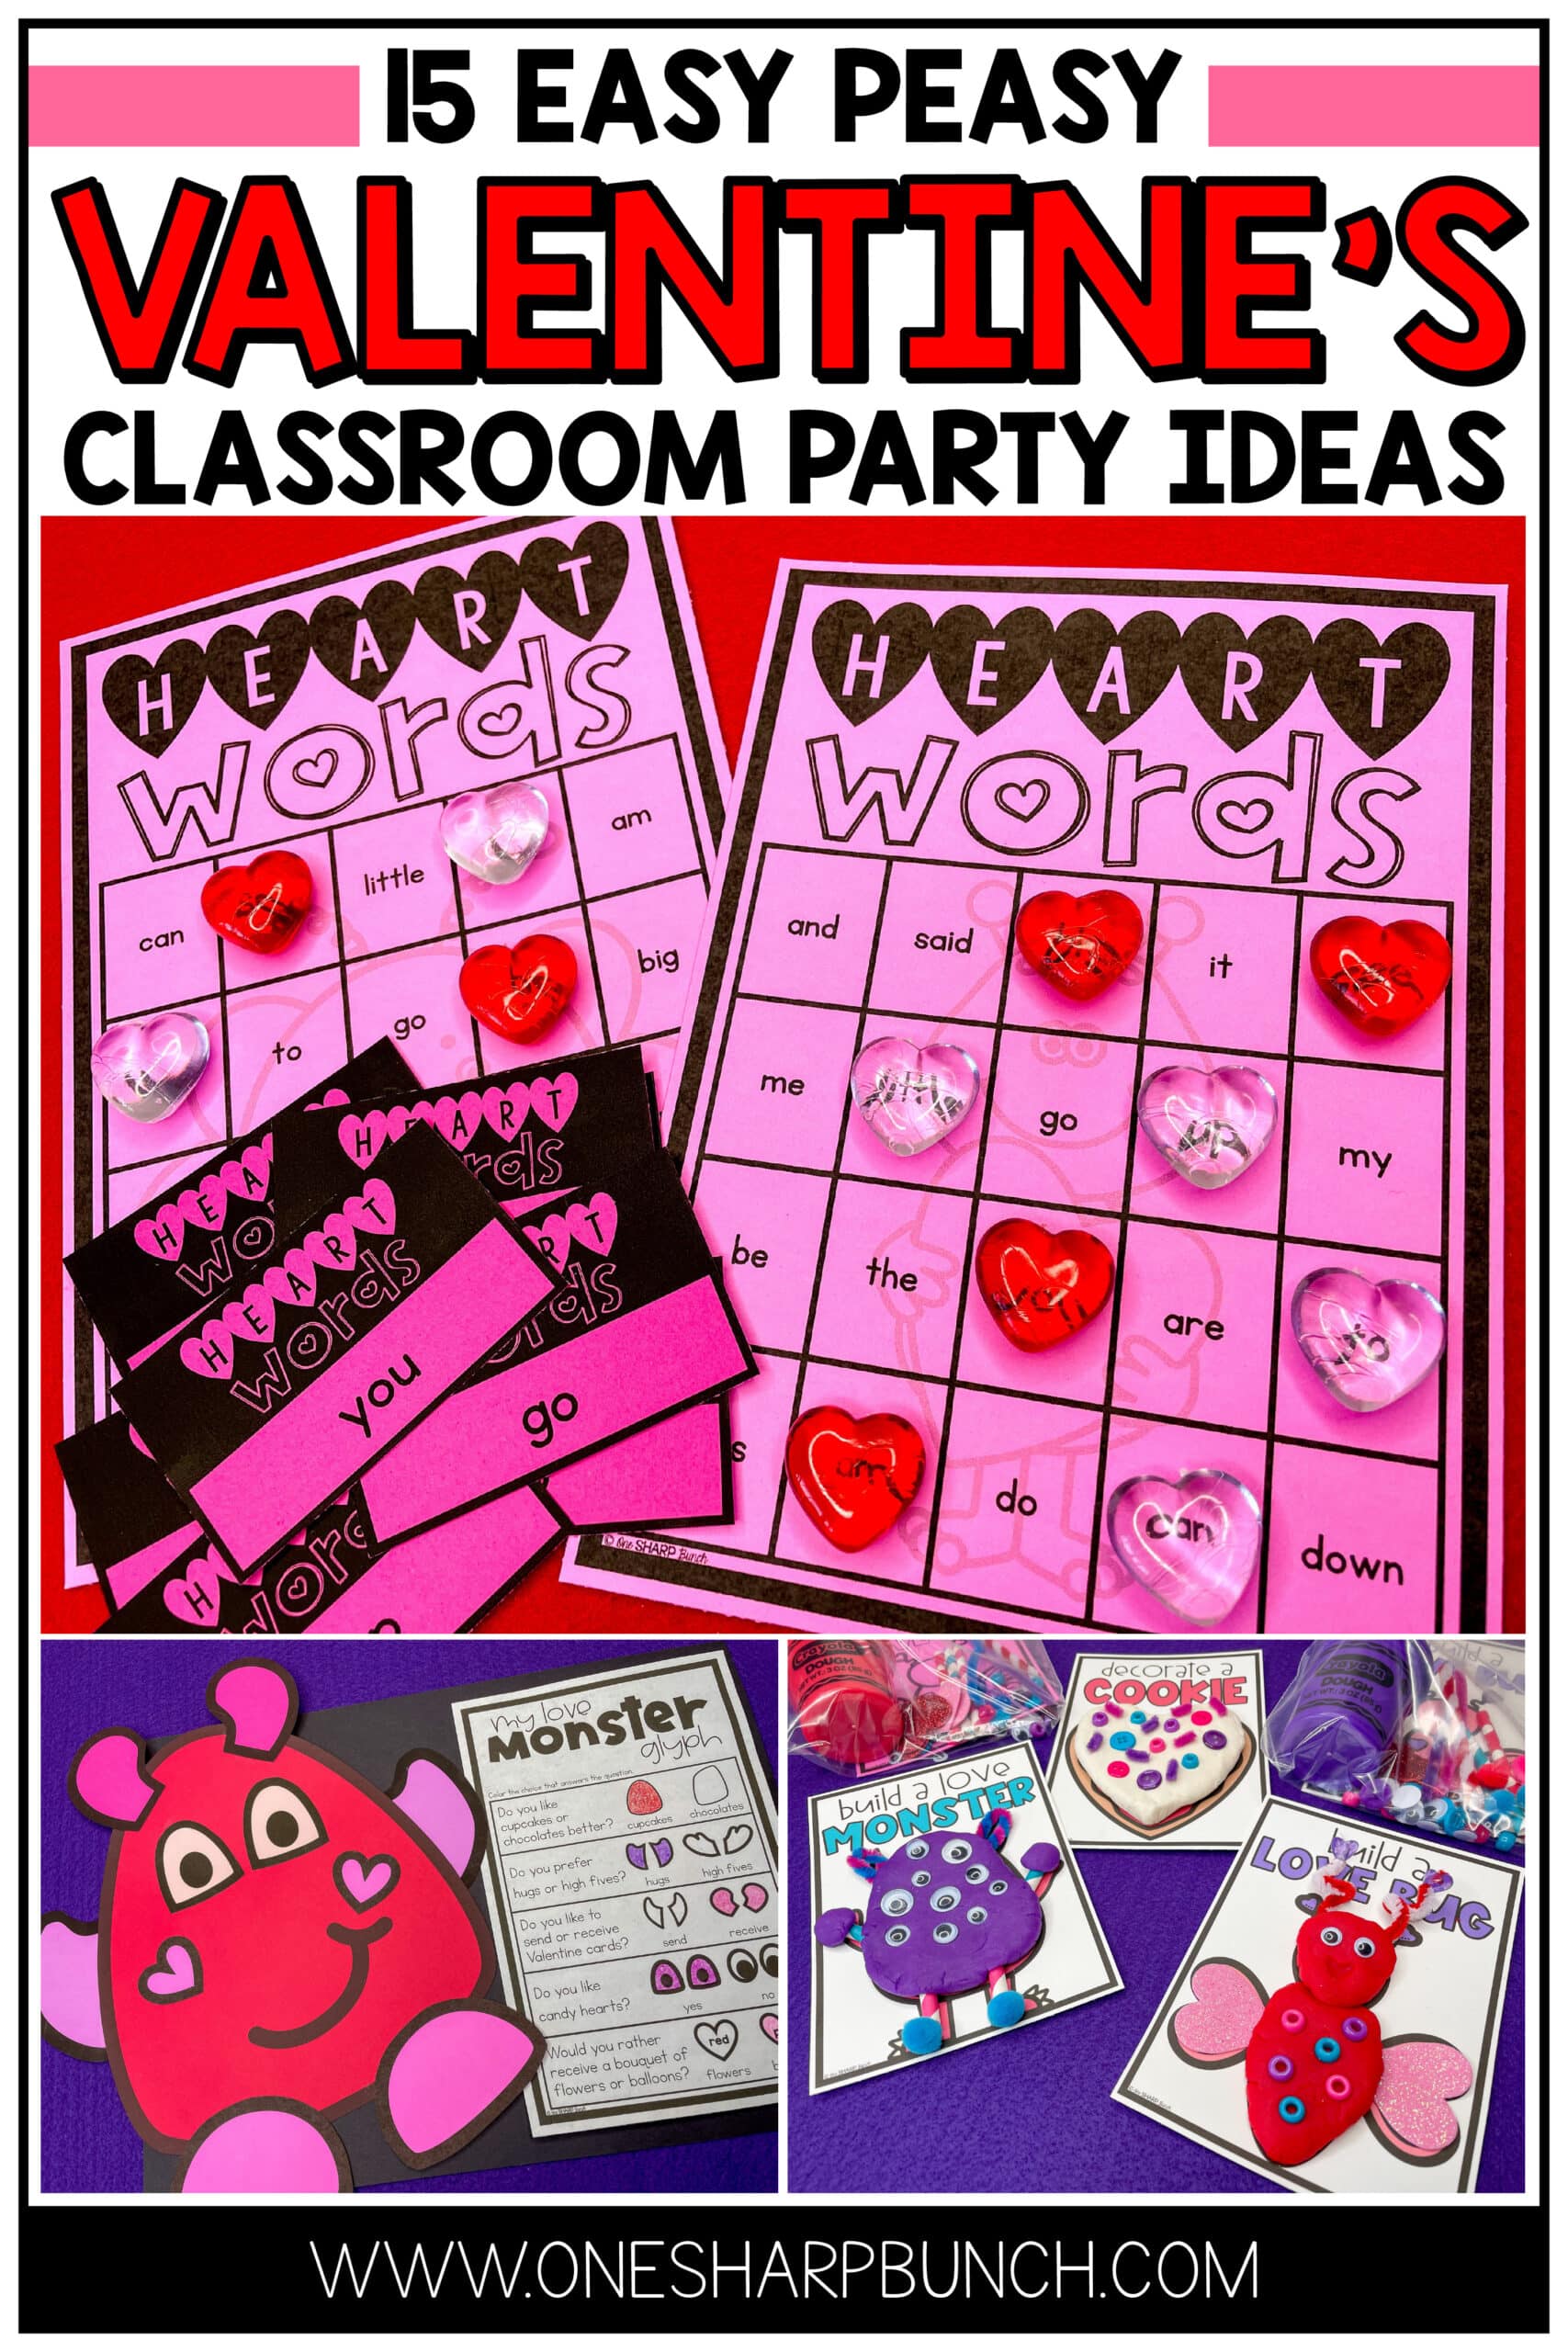 Keep your little lovebugs engaged and your classroom Valentine’s Day party well-managed, with these Valentine’s Day party ideas for the classroom, including Valentine’s Day crafts, Valentine’s Day games, Valentine’s treats and Valentine's Science Experiments! These Valentine’s Day party activities are sure to be a lovely hit this February! #winter #valentinesday #valentinesdaypartyideas #classroomvalentinesdayparty #diyvalentines #diyvalentinesdayparty #valentinecrafts #valentinegames